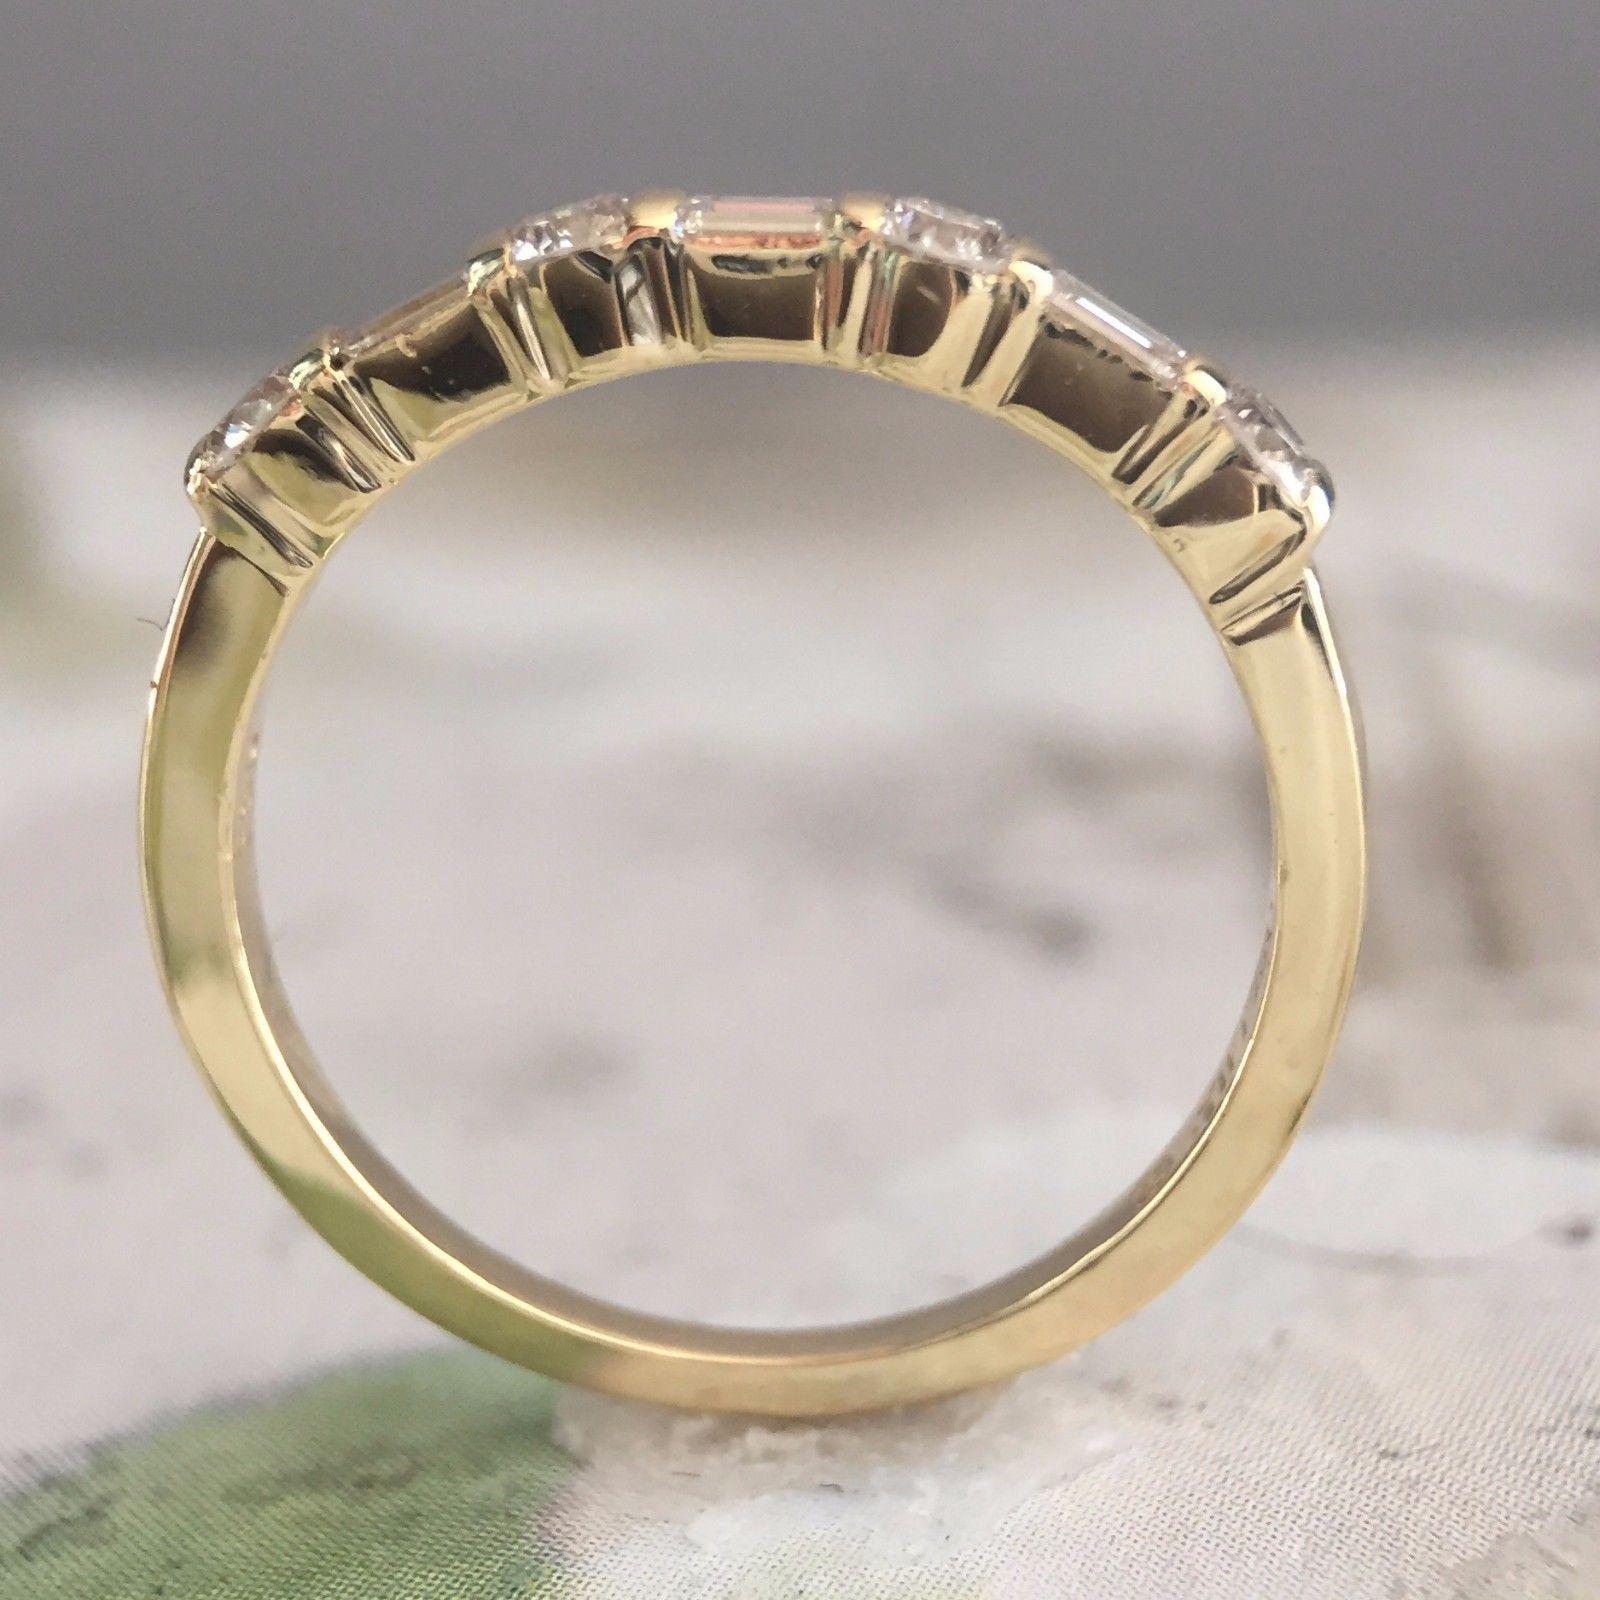 Tiffany & Co. Wedding Band Round and Emerald Cut 18 Karat Gold Ring 0.36 Carat In Good Condition For Sale In West Hollywood, CA